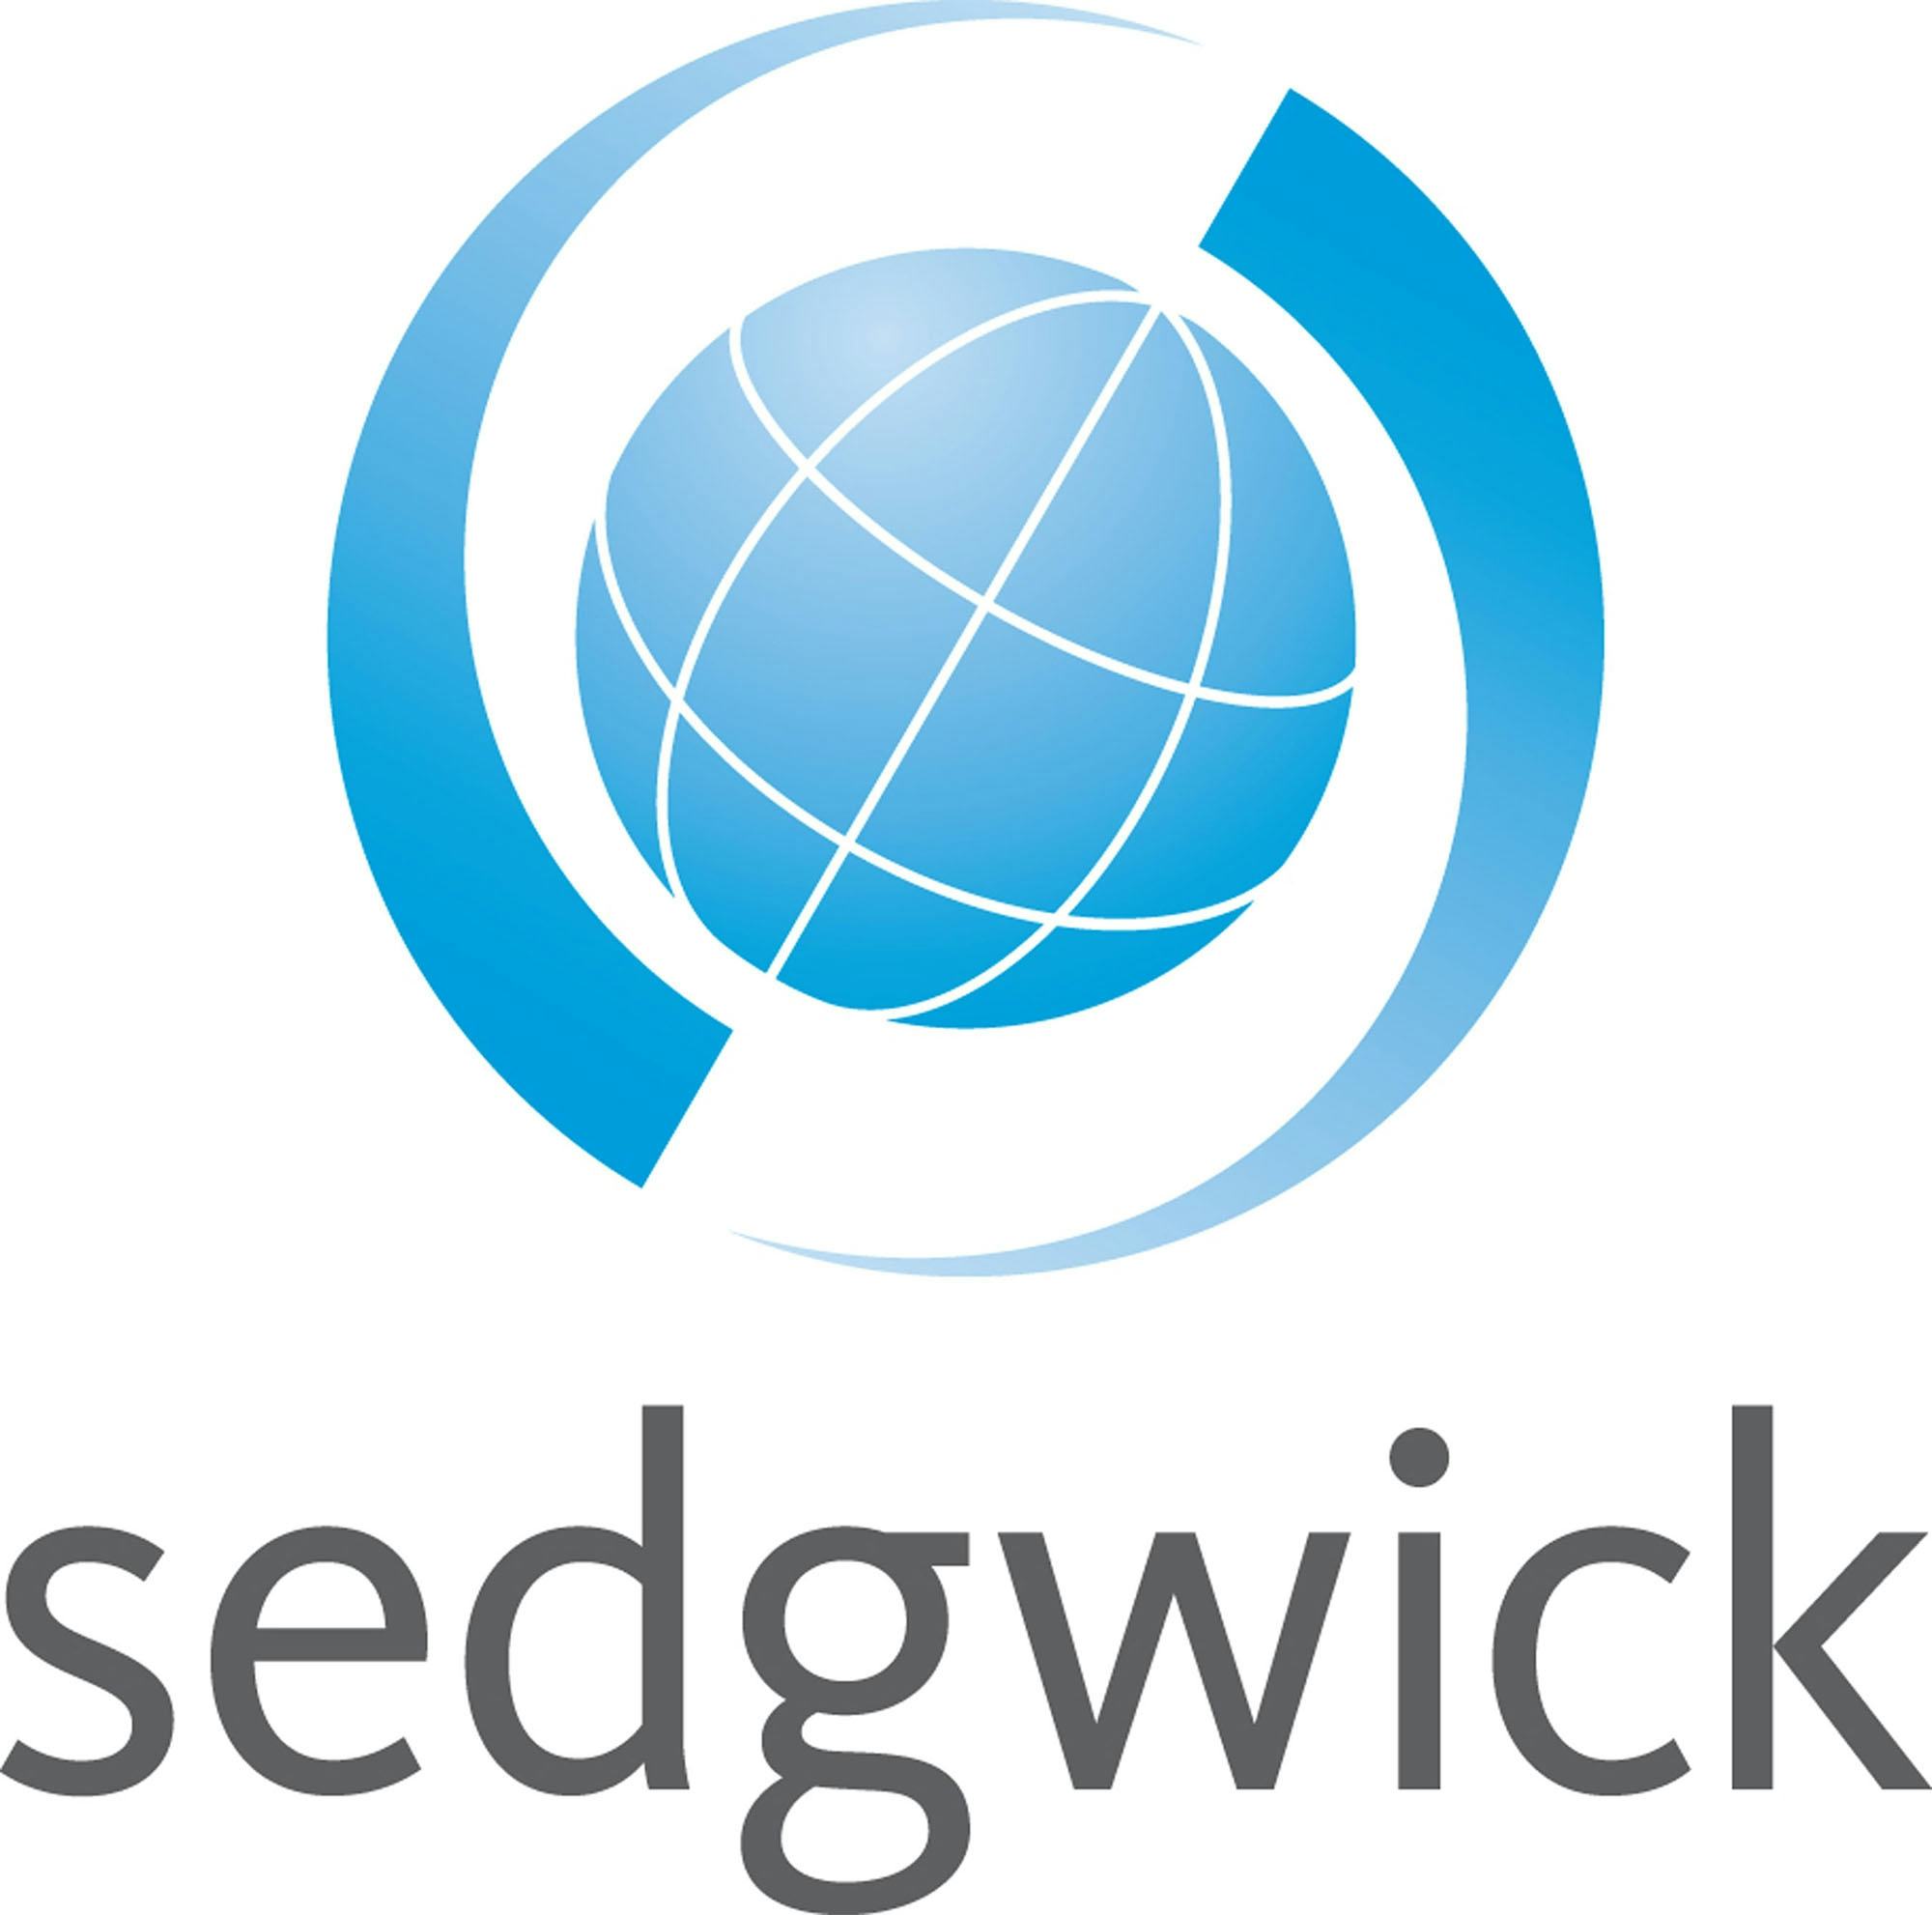 Sedgwick in handen van The Carlyle Group